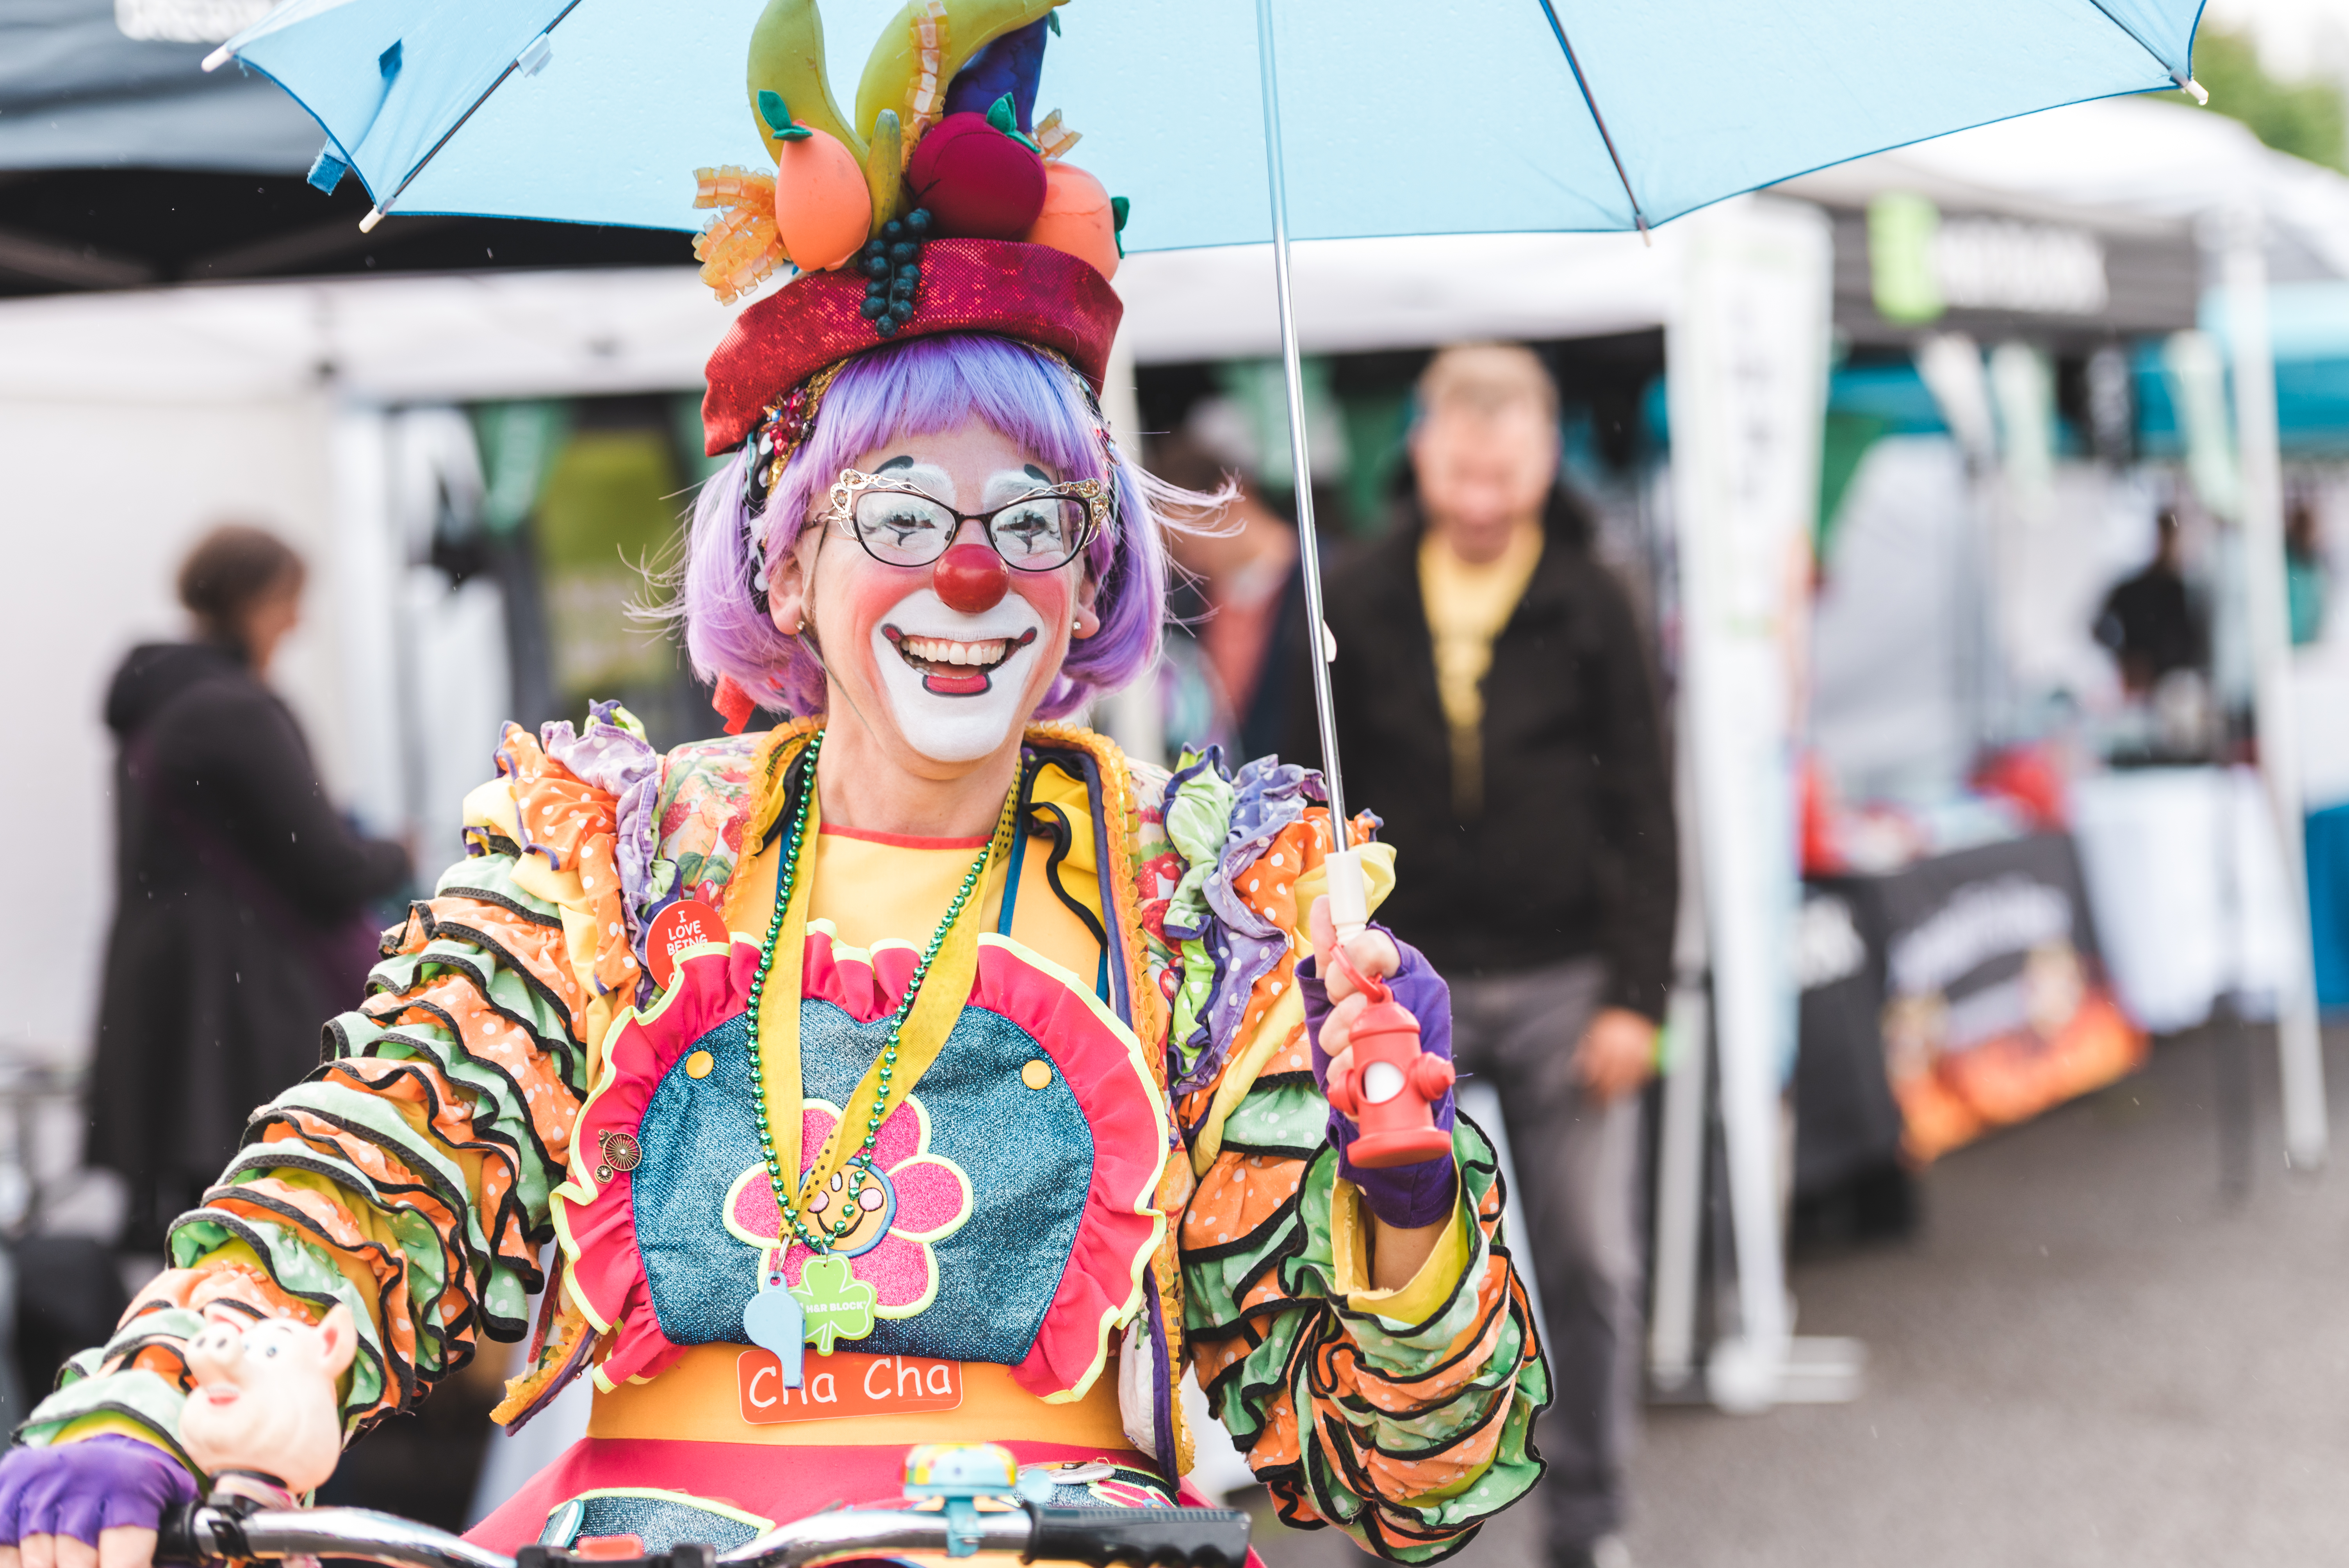 Female clown named Cha Cha at Festival of Nations